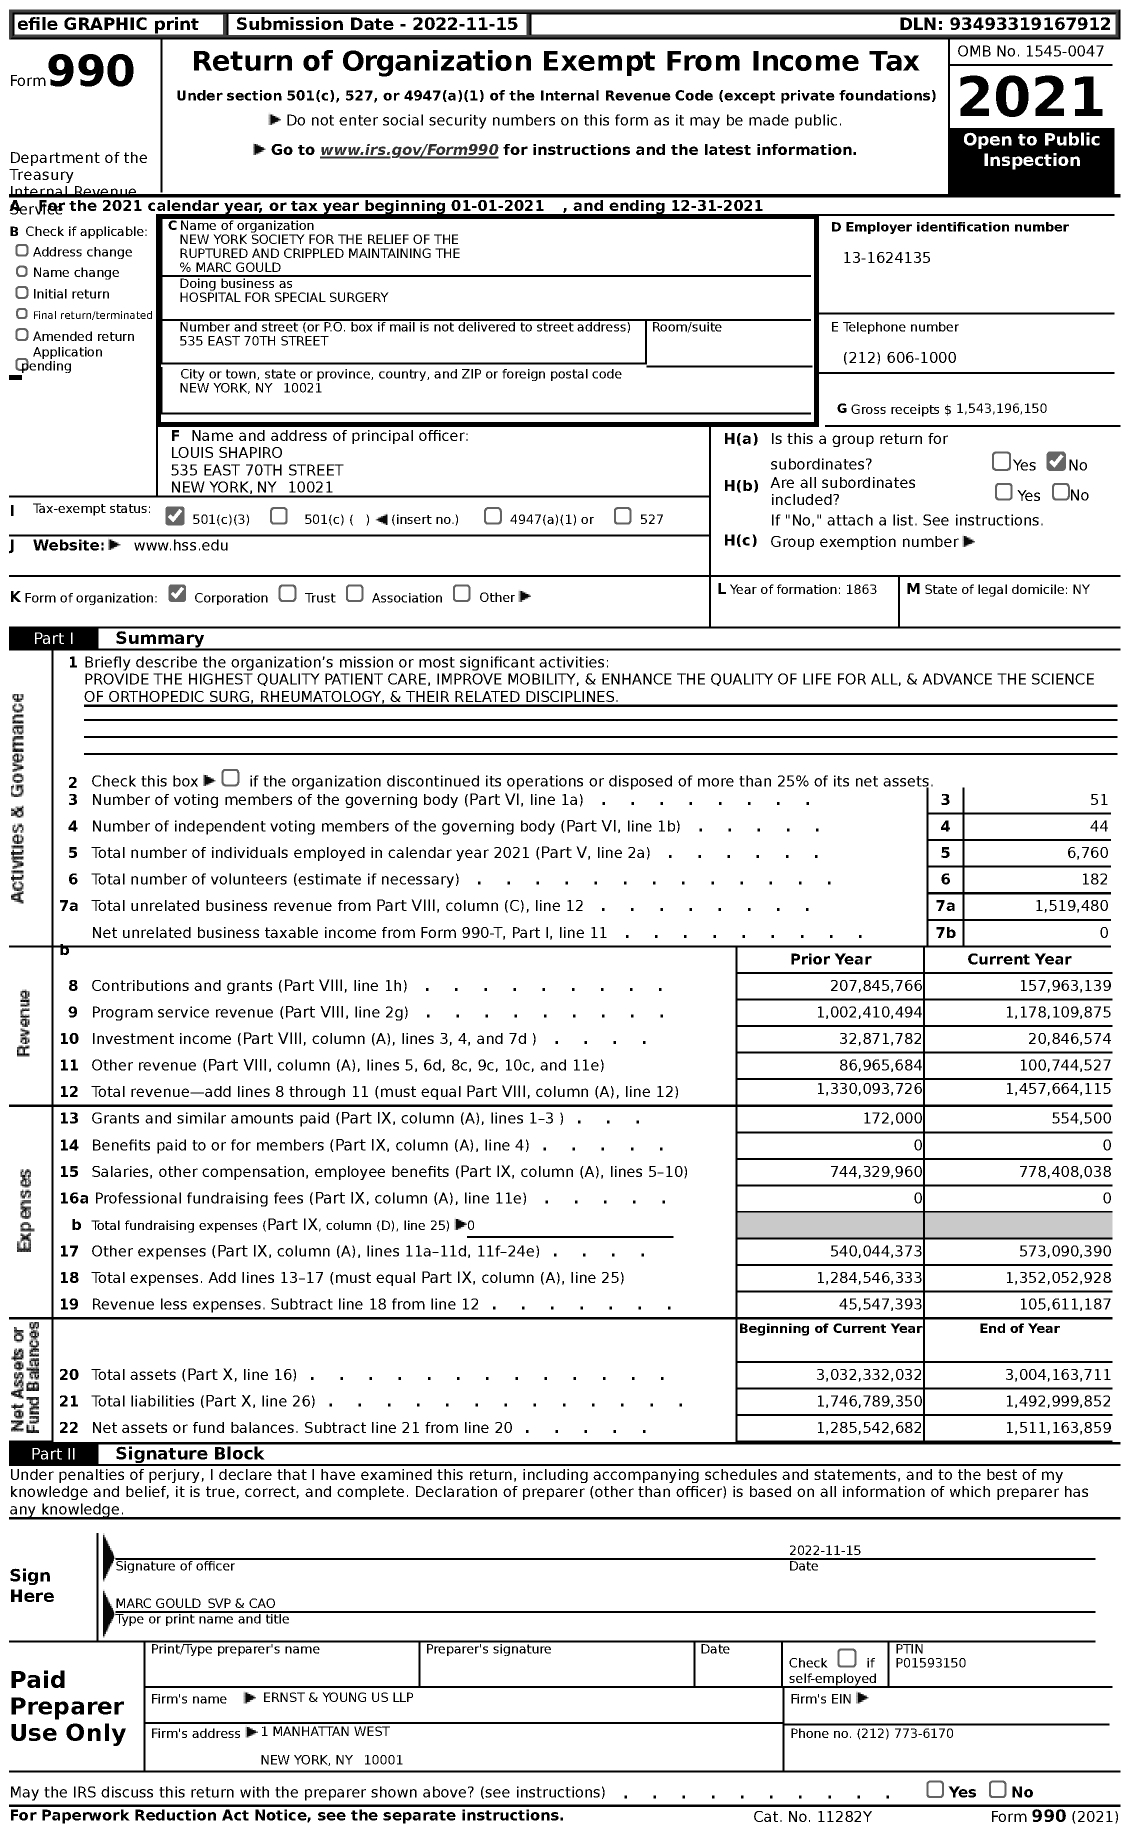 Image of first page of 2021 Form 990 for Hospital for Special Surgery (HSS)